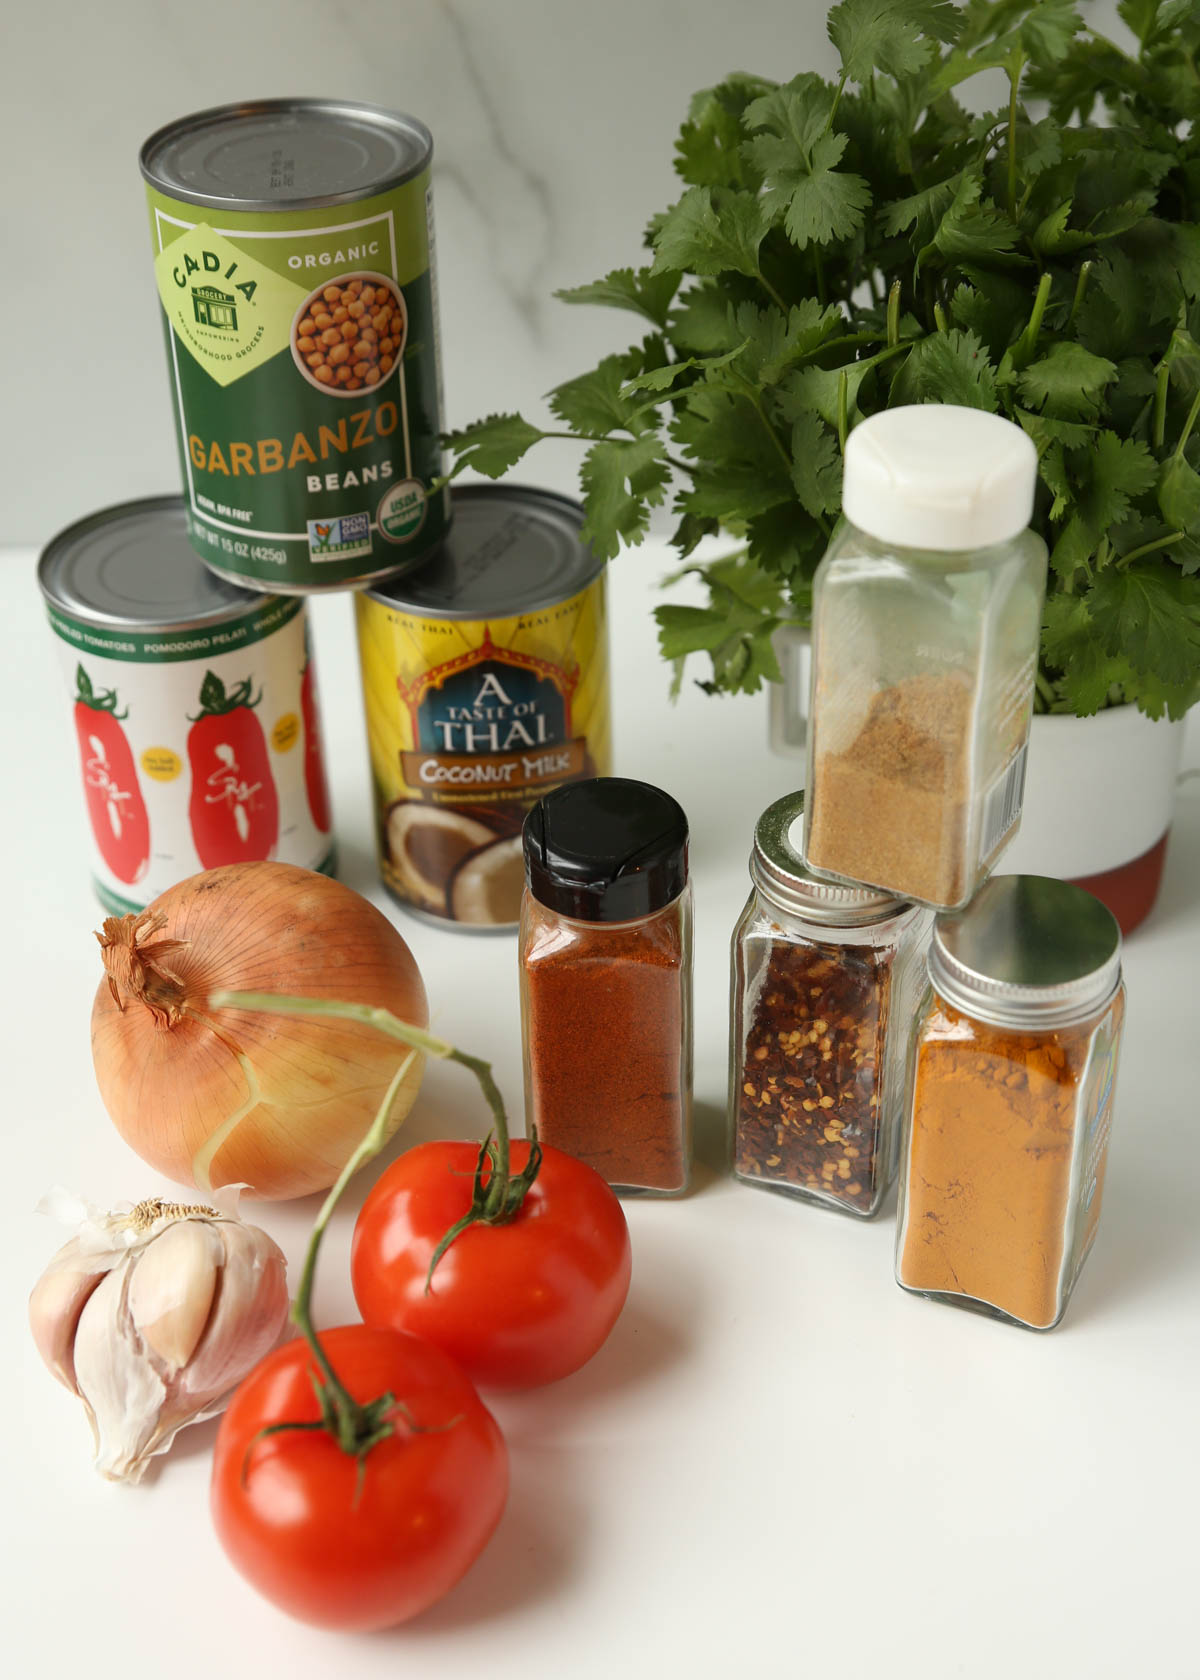 Ingredients for tomato and chickpea curry